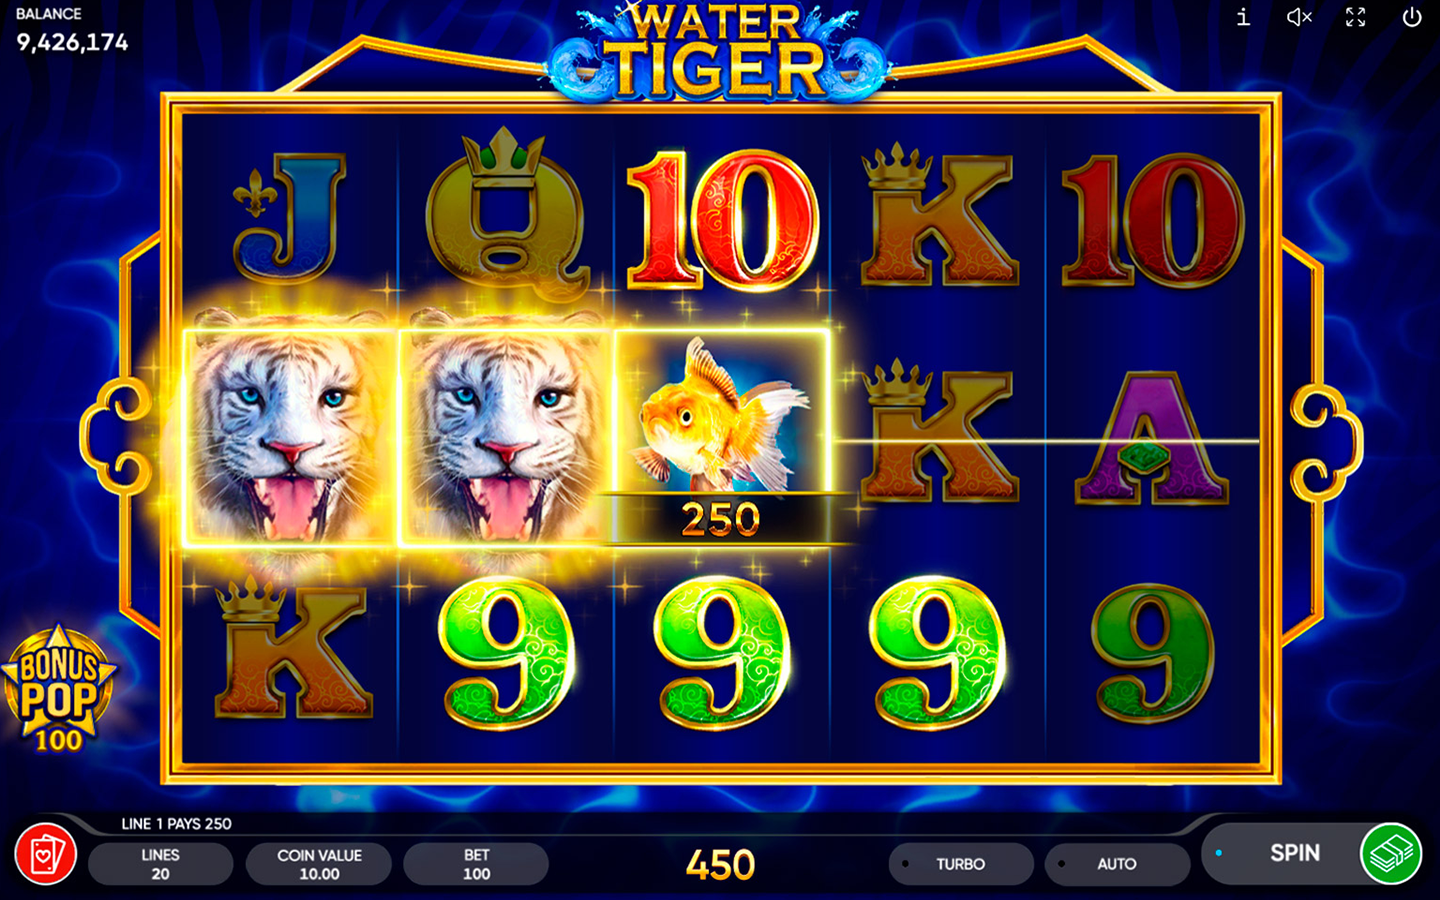 iGAMING PROVIDER 2021 | Water Tiger slot is released by Endorphina